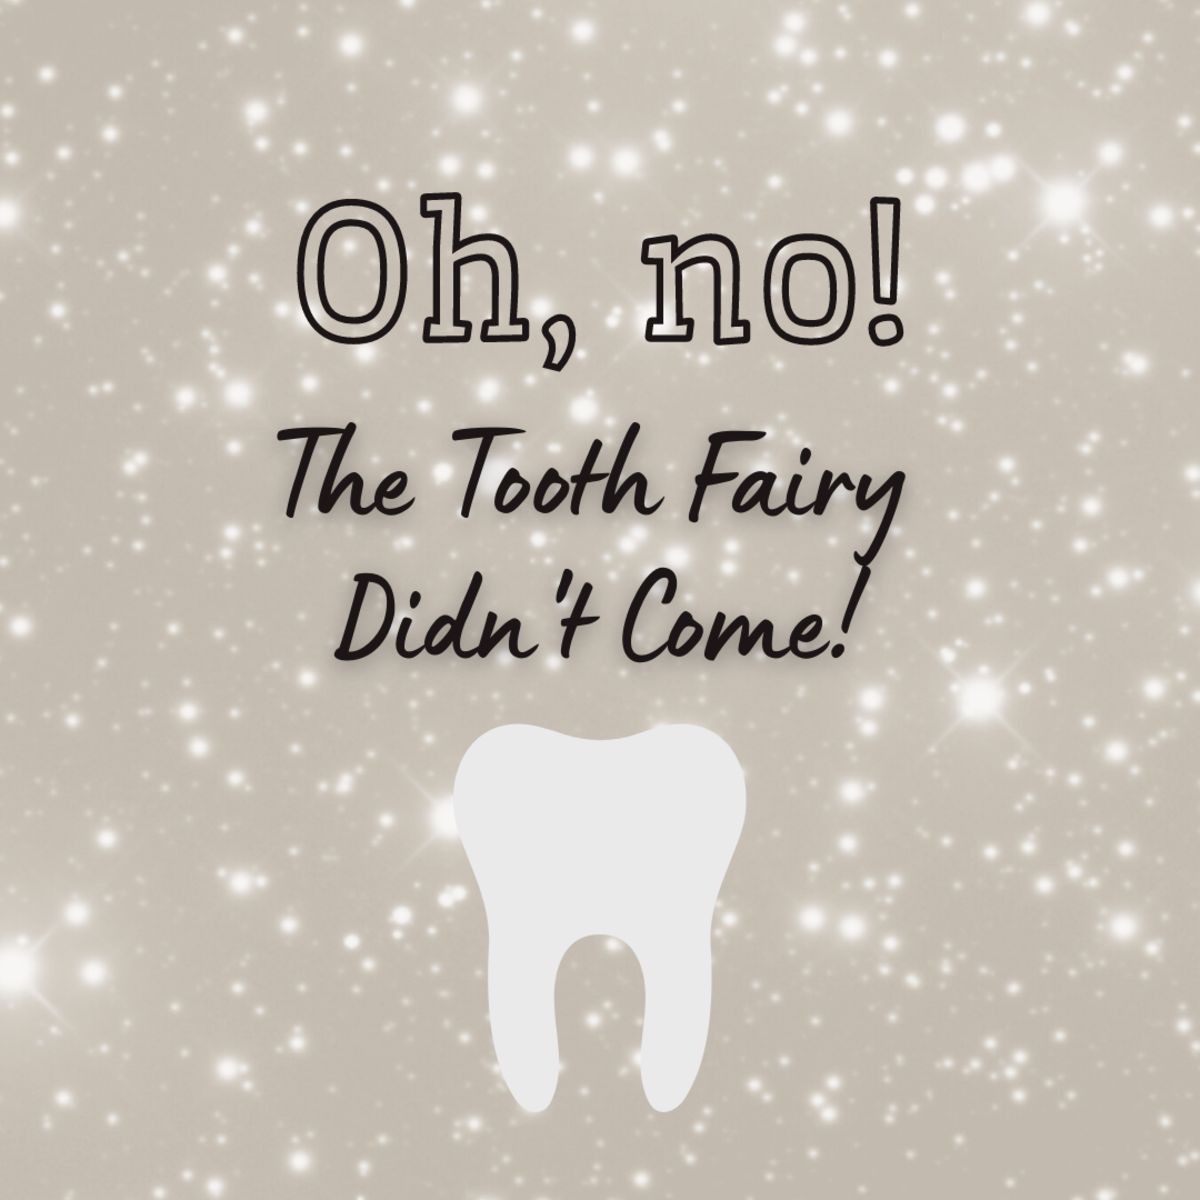 What parents should do if they forgot to tell the Tooth Fairy to collect their child's tooth